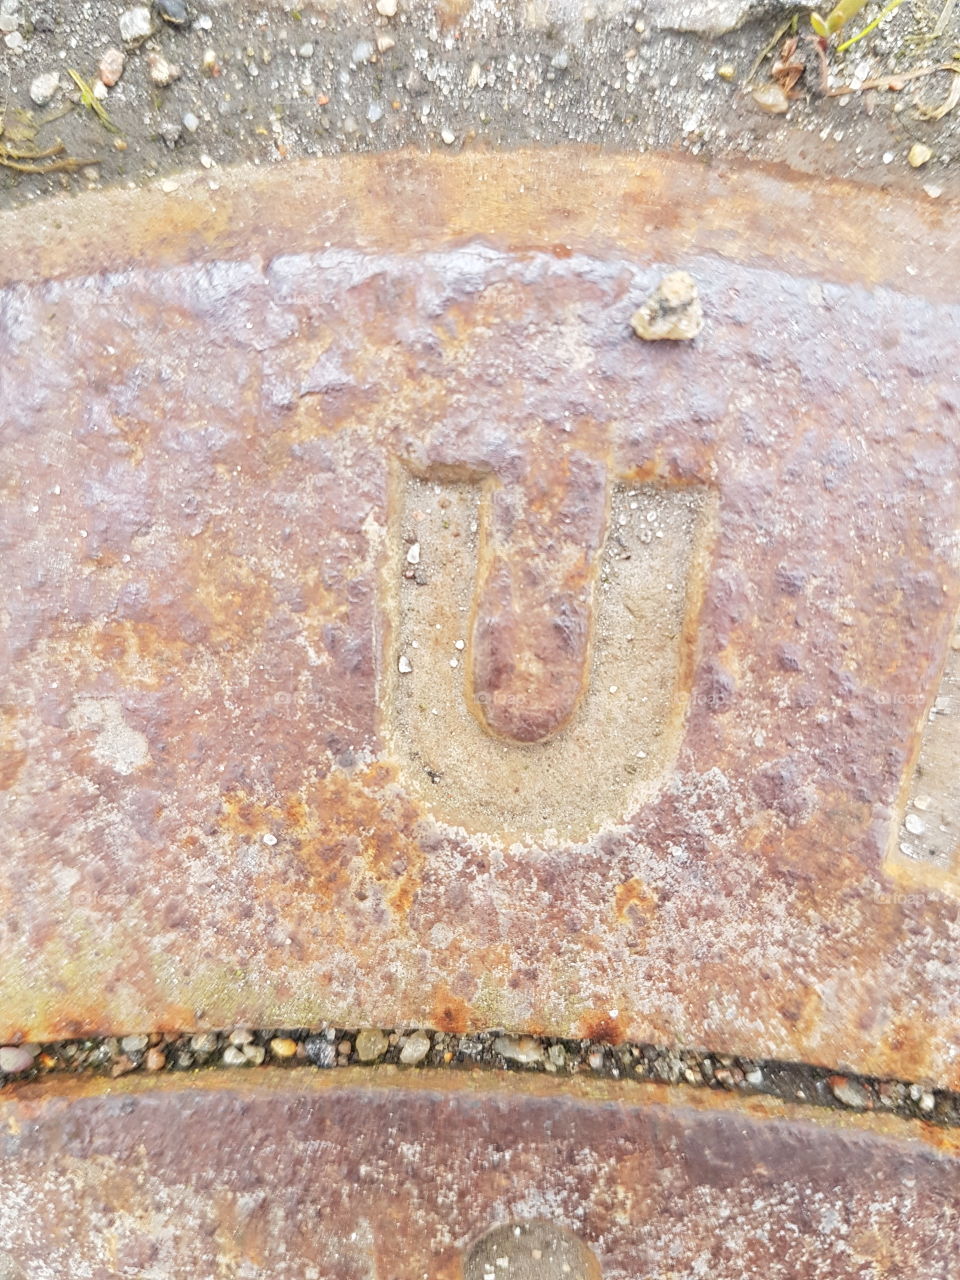 rusted letter U on manhole cover